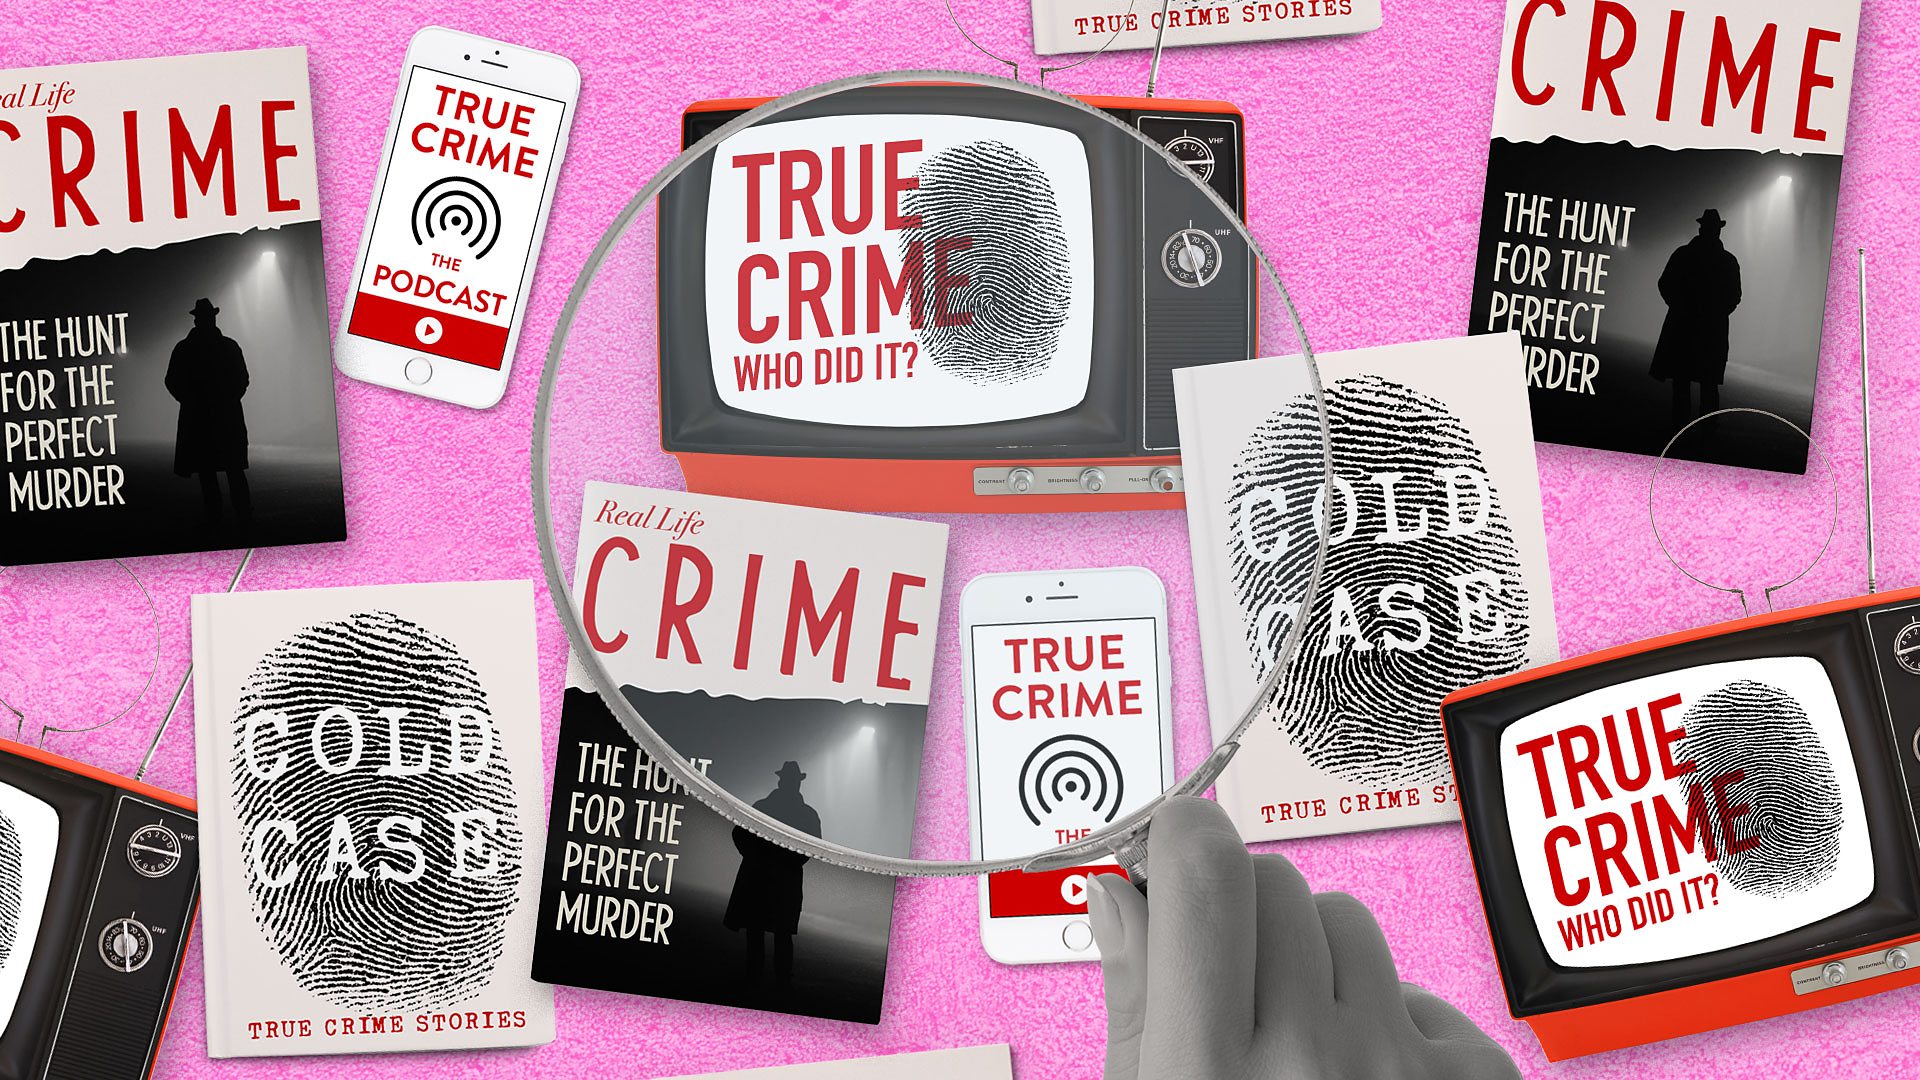 Feast on those goosebumps with our chilling round-up of the scariest true crime podcasts ever! Swirl macabre tales, dread-laden narratives, and uncanny reality in your earbuds. Dive in, if you dare!